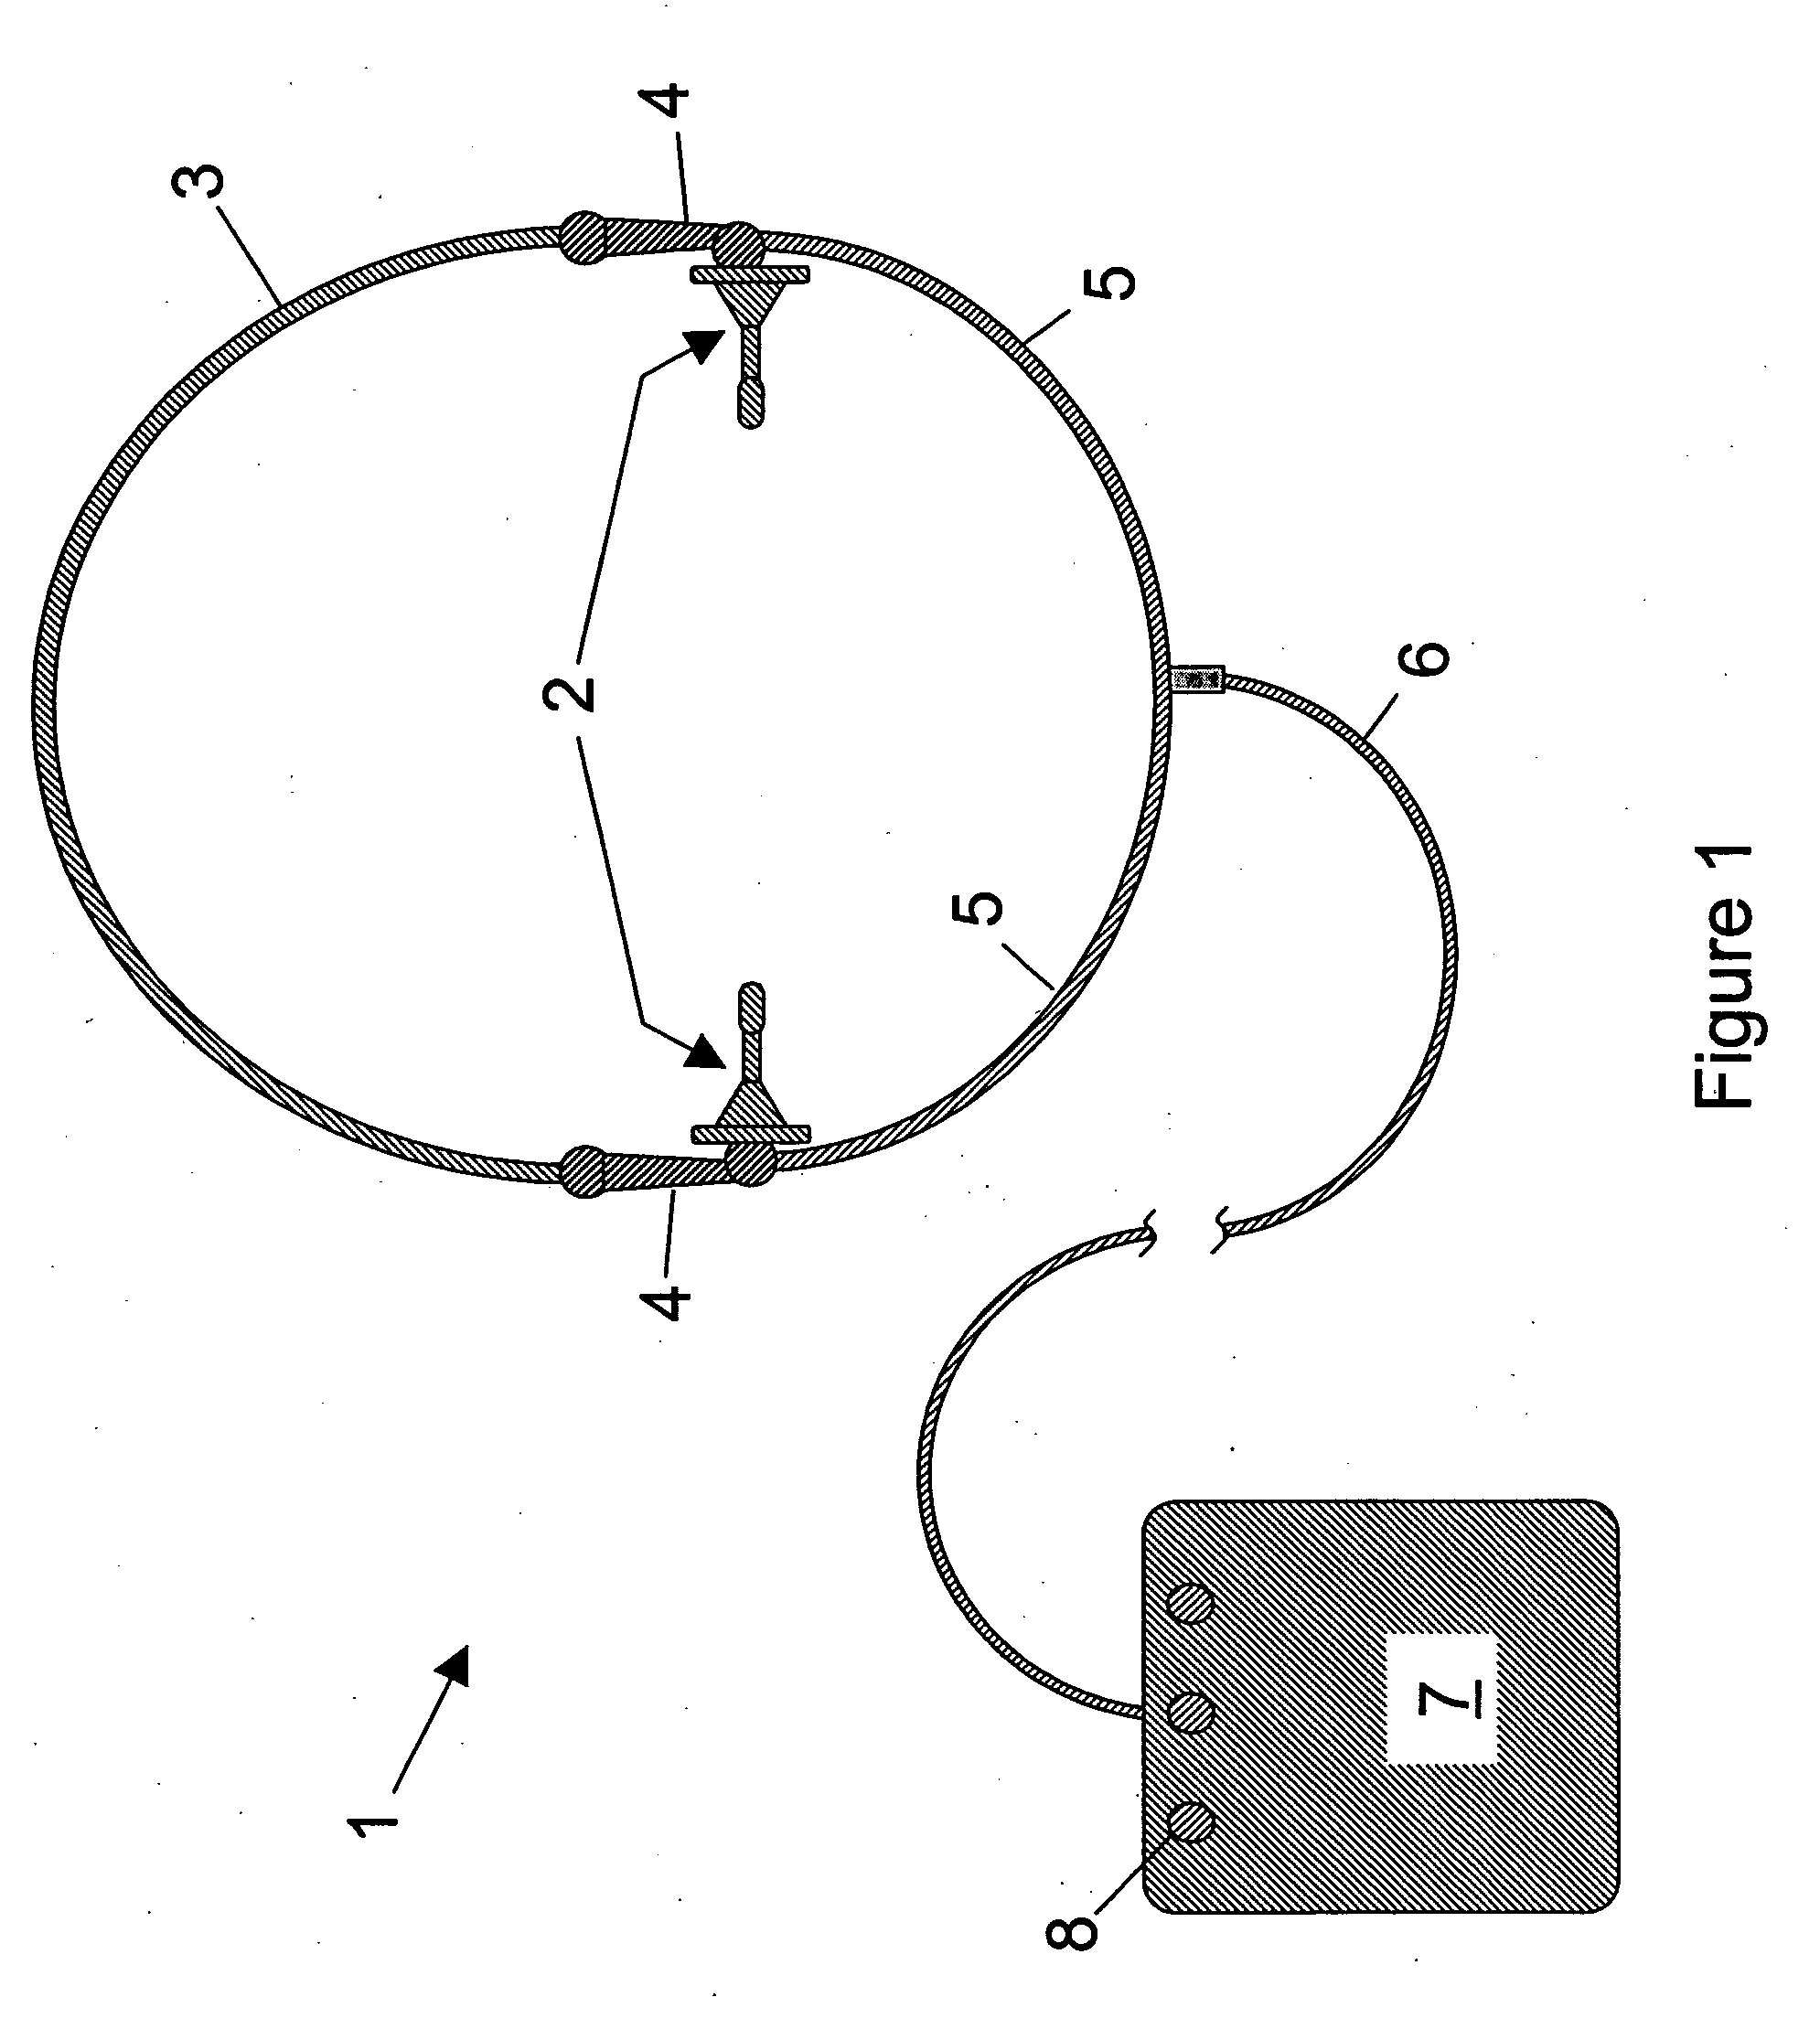 Apparatus, system and method for detecting and treating airway obstructive conditions during sleep